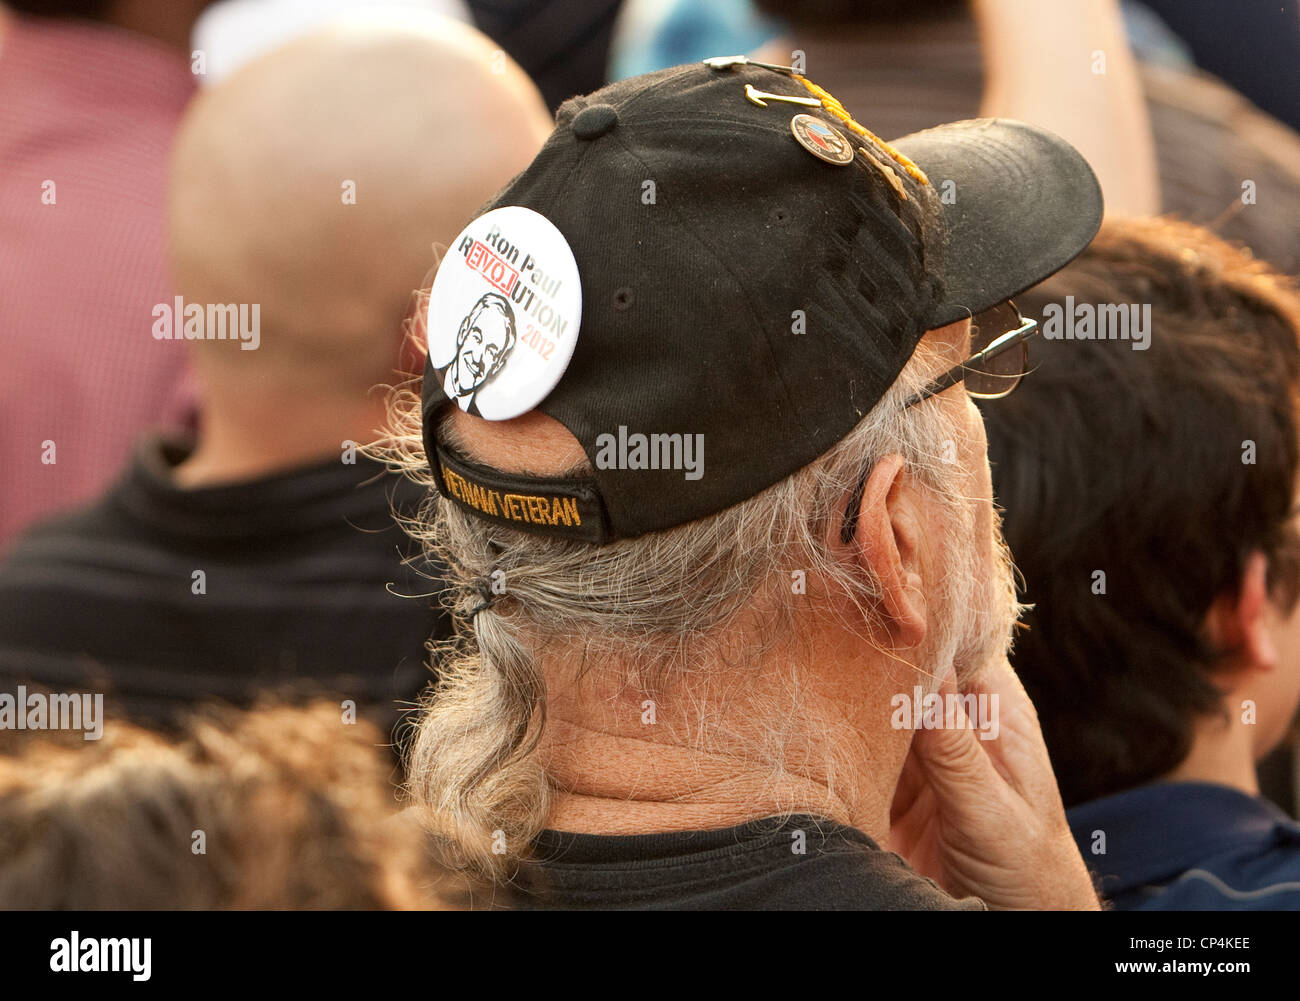 Man wearing baseball hat with political campaign button pro Ron Paul in Texas Stock Photo